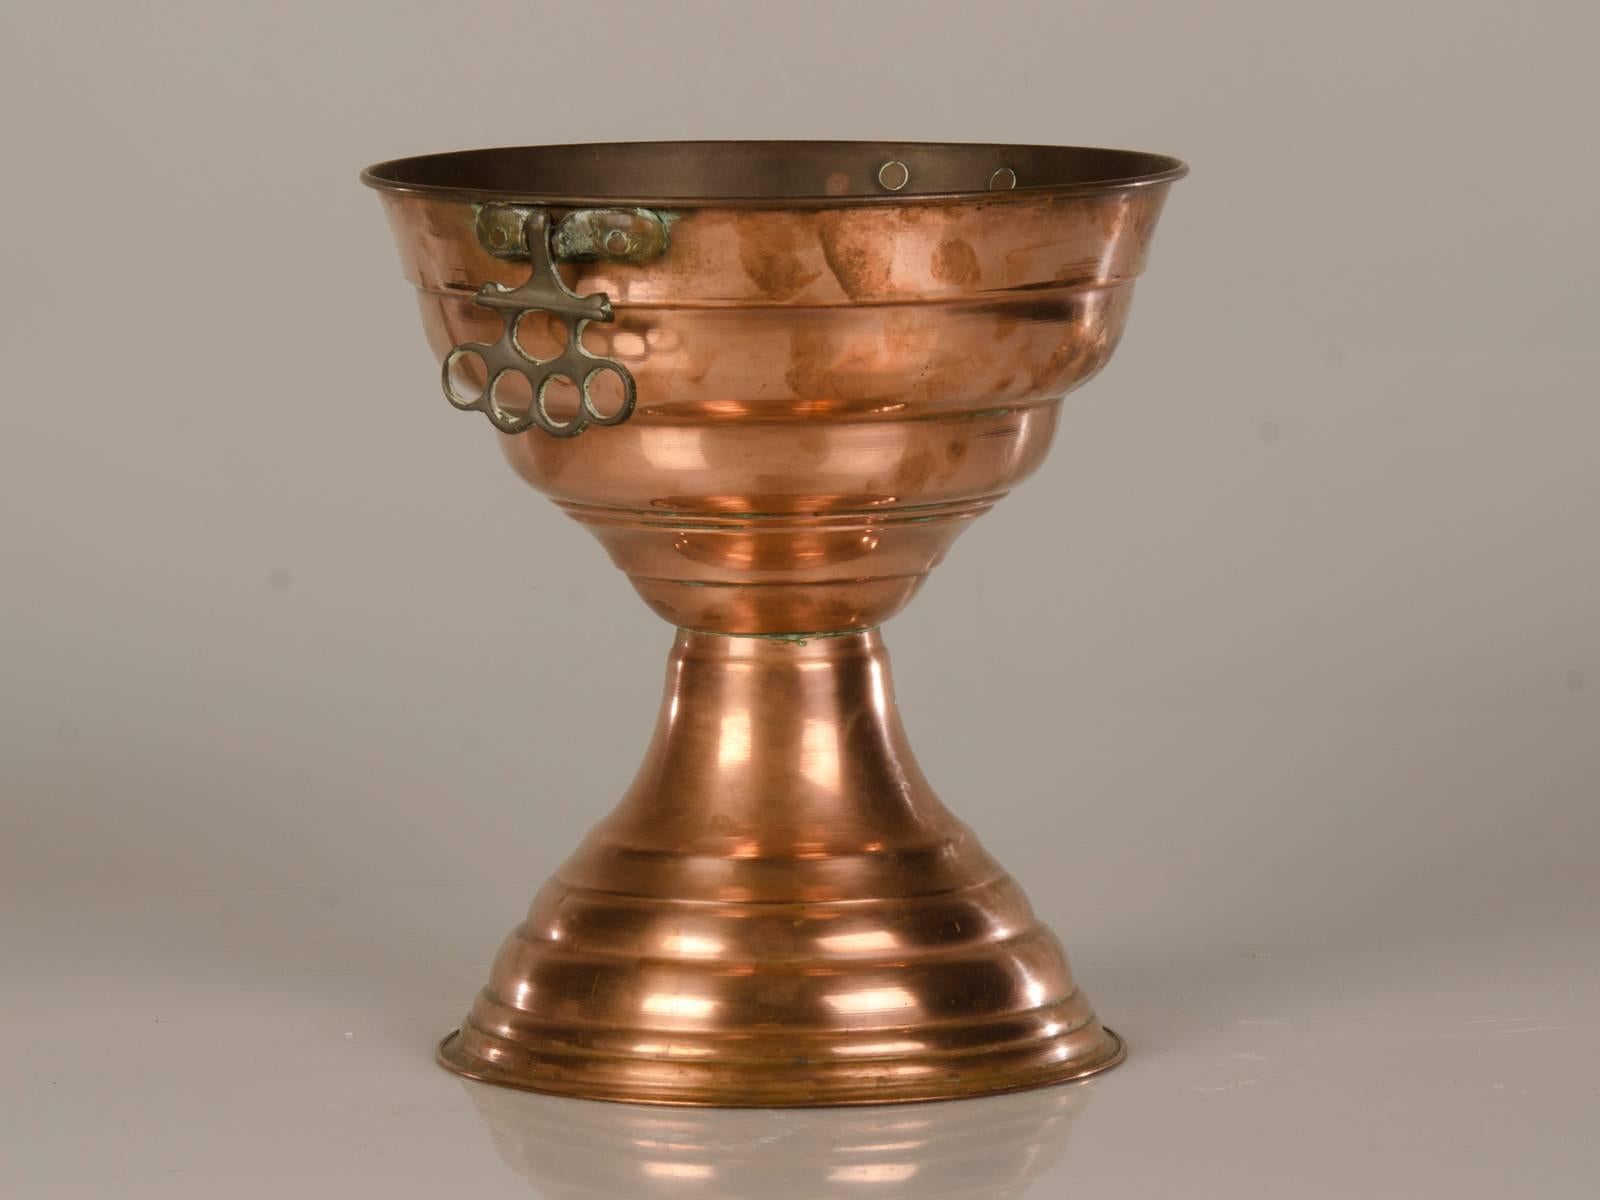 An unusual and tall antique French copper vase with a double bowl shape, circa 1910. The curious repetition of the shaped bowl gives this French copper vessel its decided allure. Both the upper and lower rims feature a rolled edge that perfectly